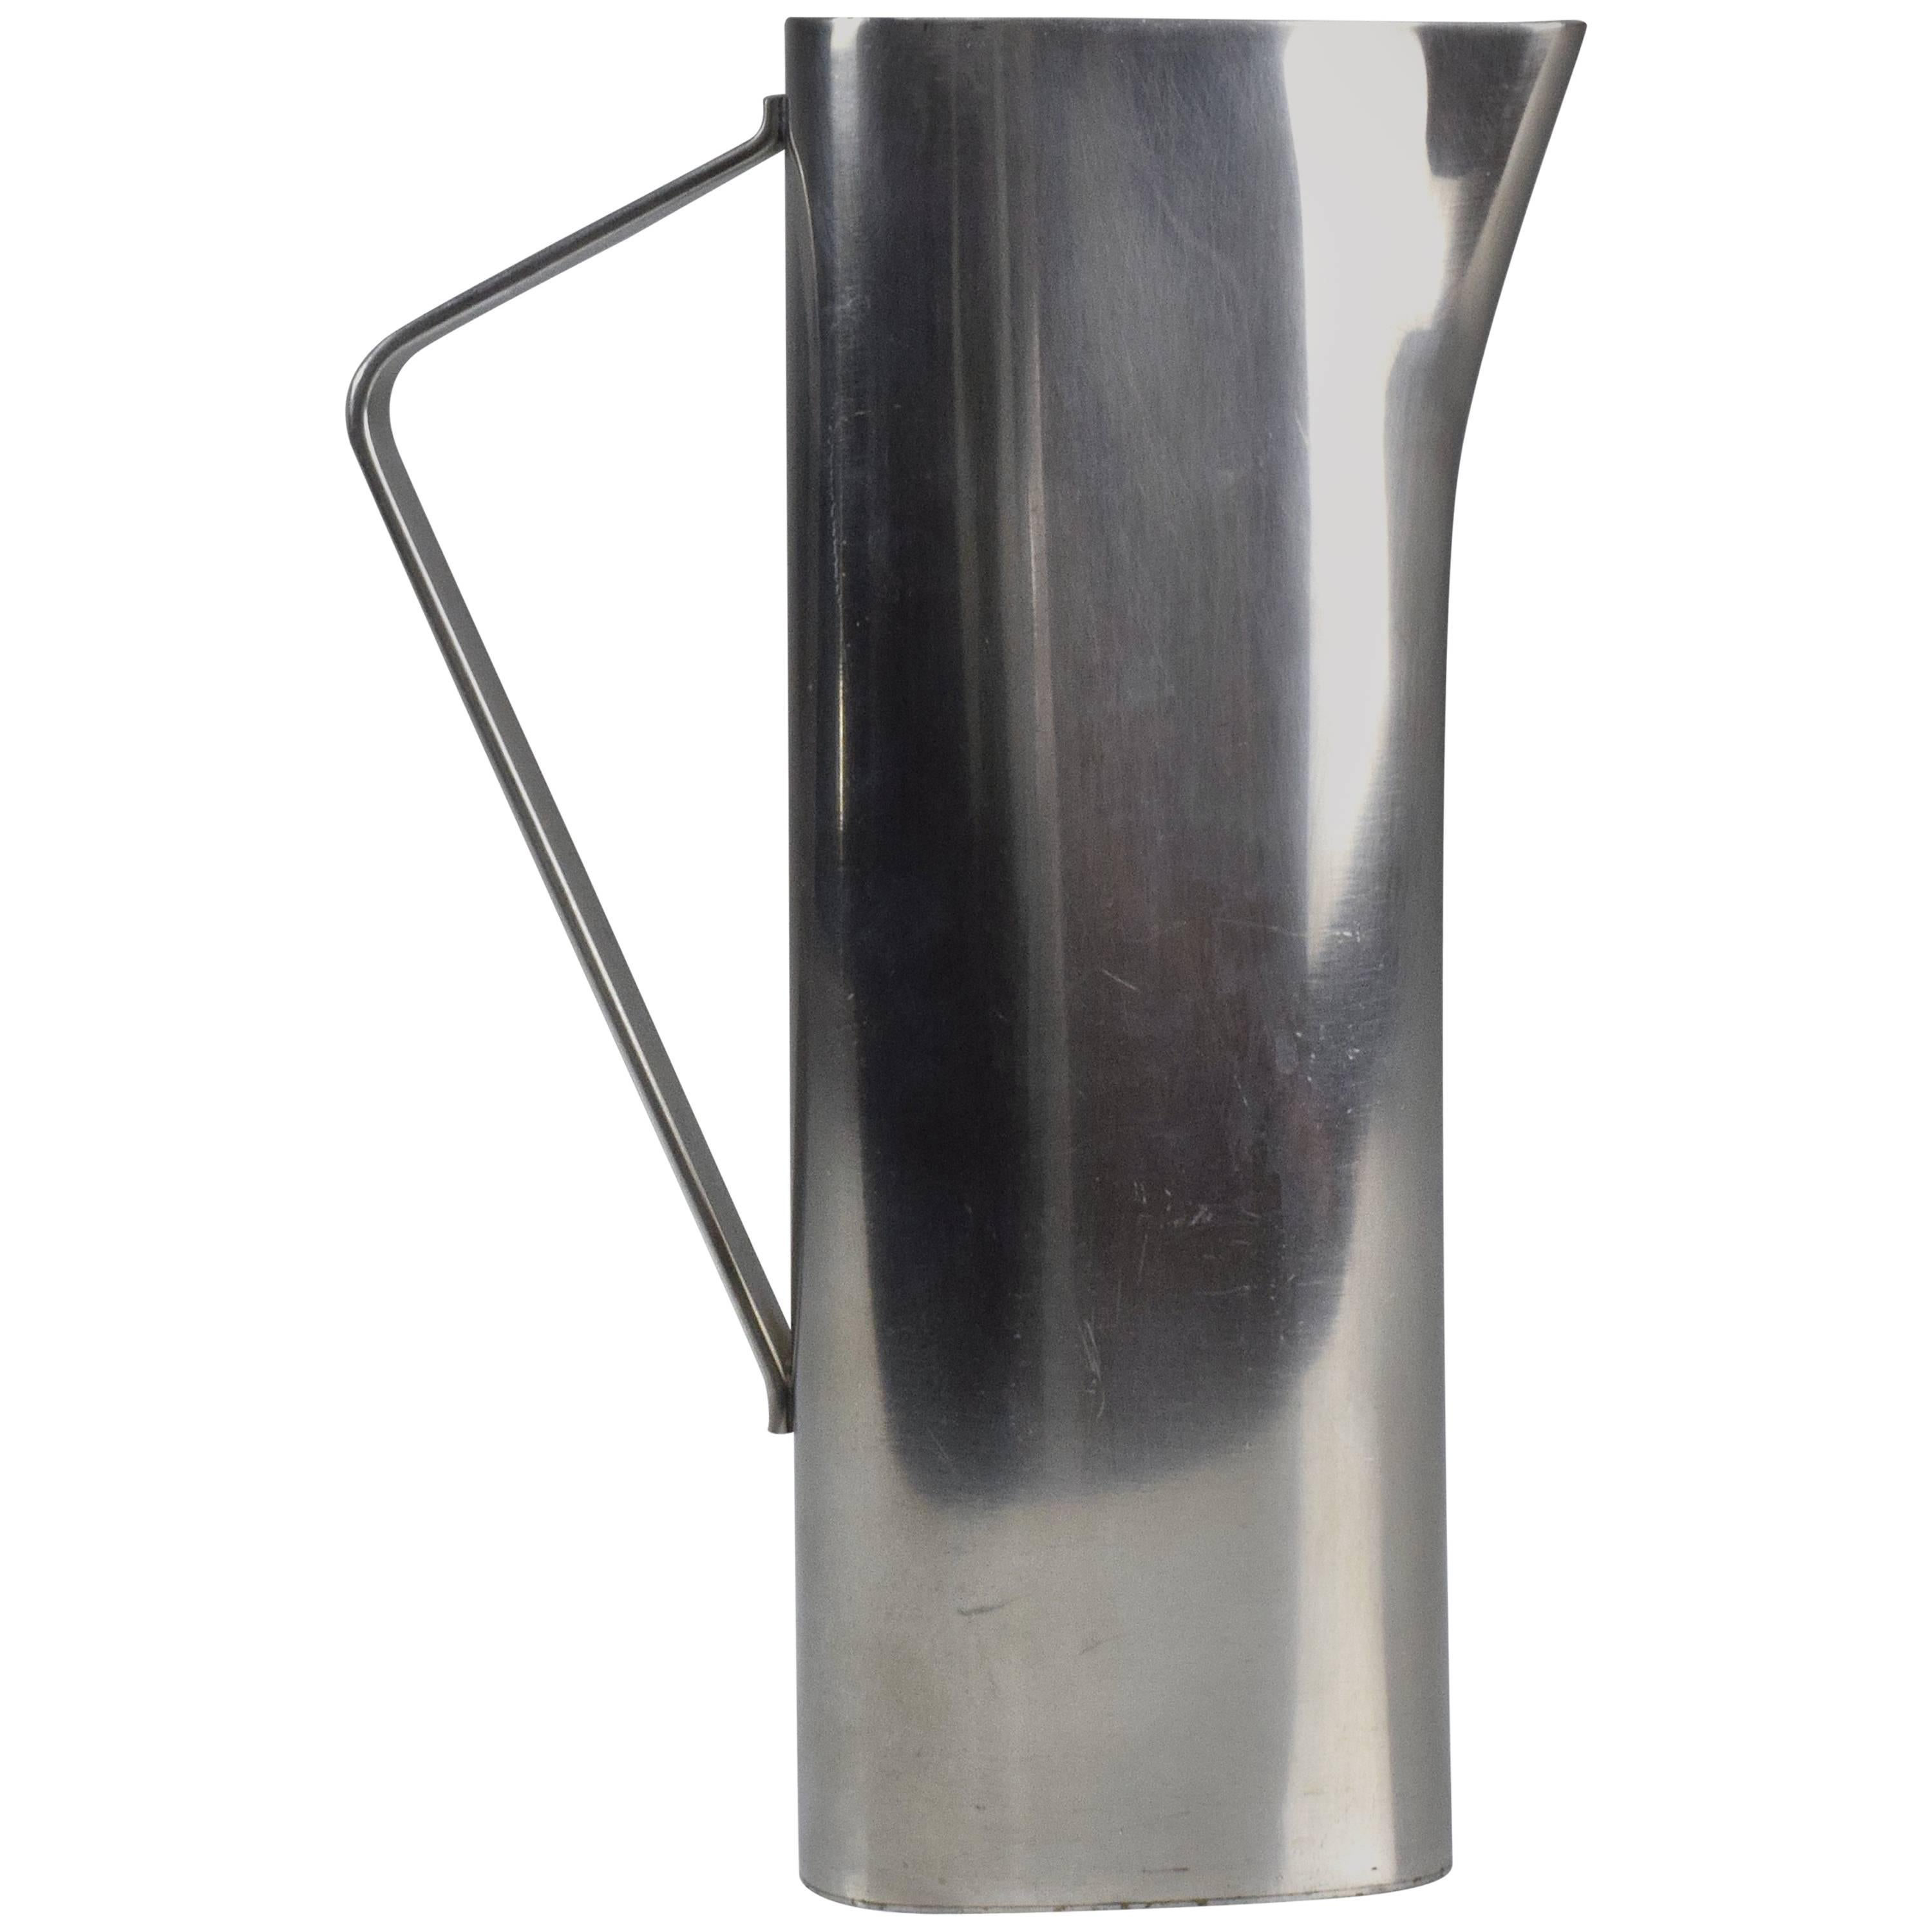 20th century vintage Lundtofte pitcher composed of stainless steel in Scandinavian Modern style. This pitcher jug is a beautiful decorative tableware addition.
Denmark, circa 1960s.

